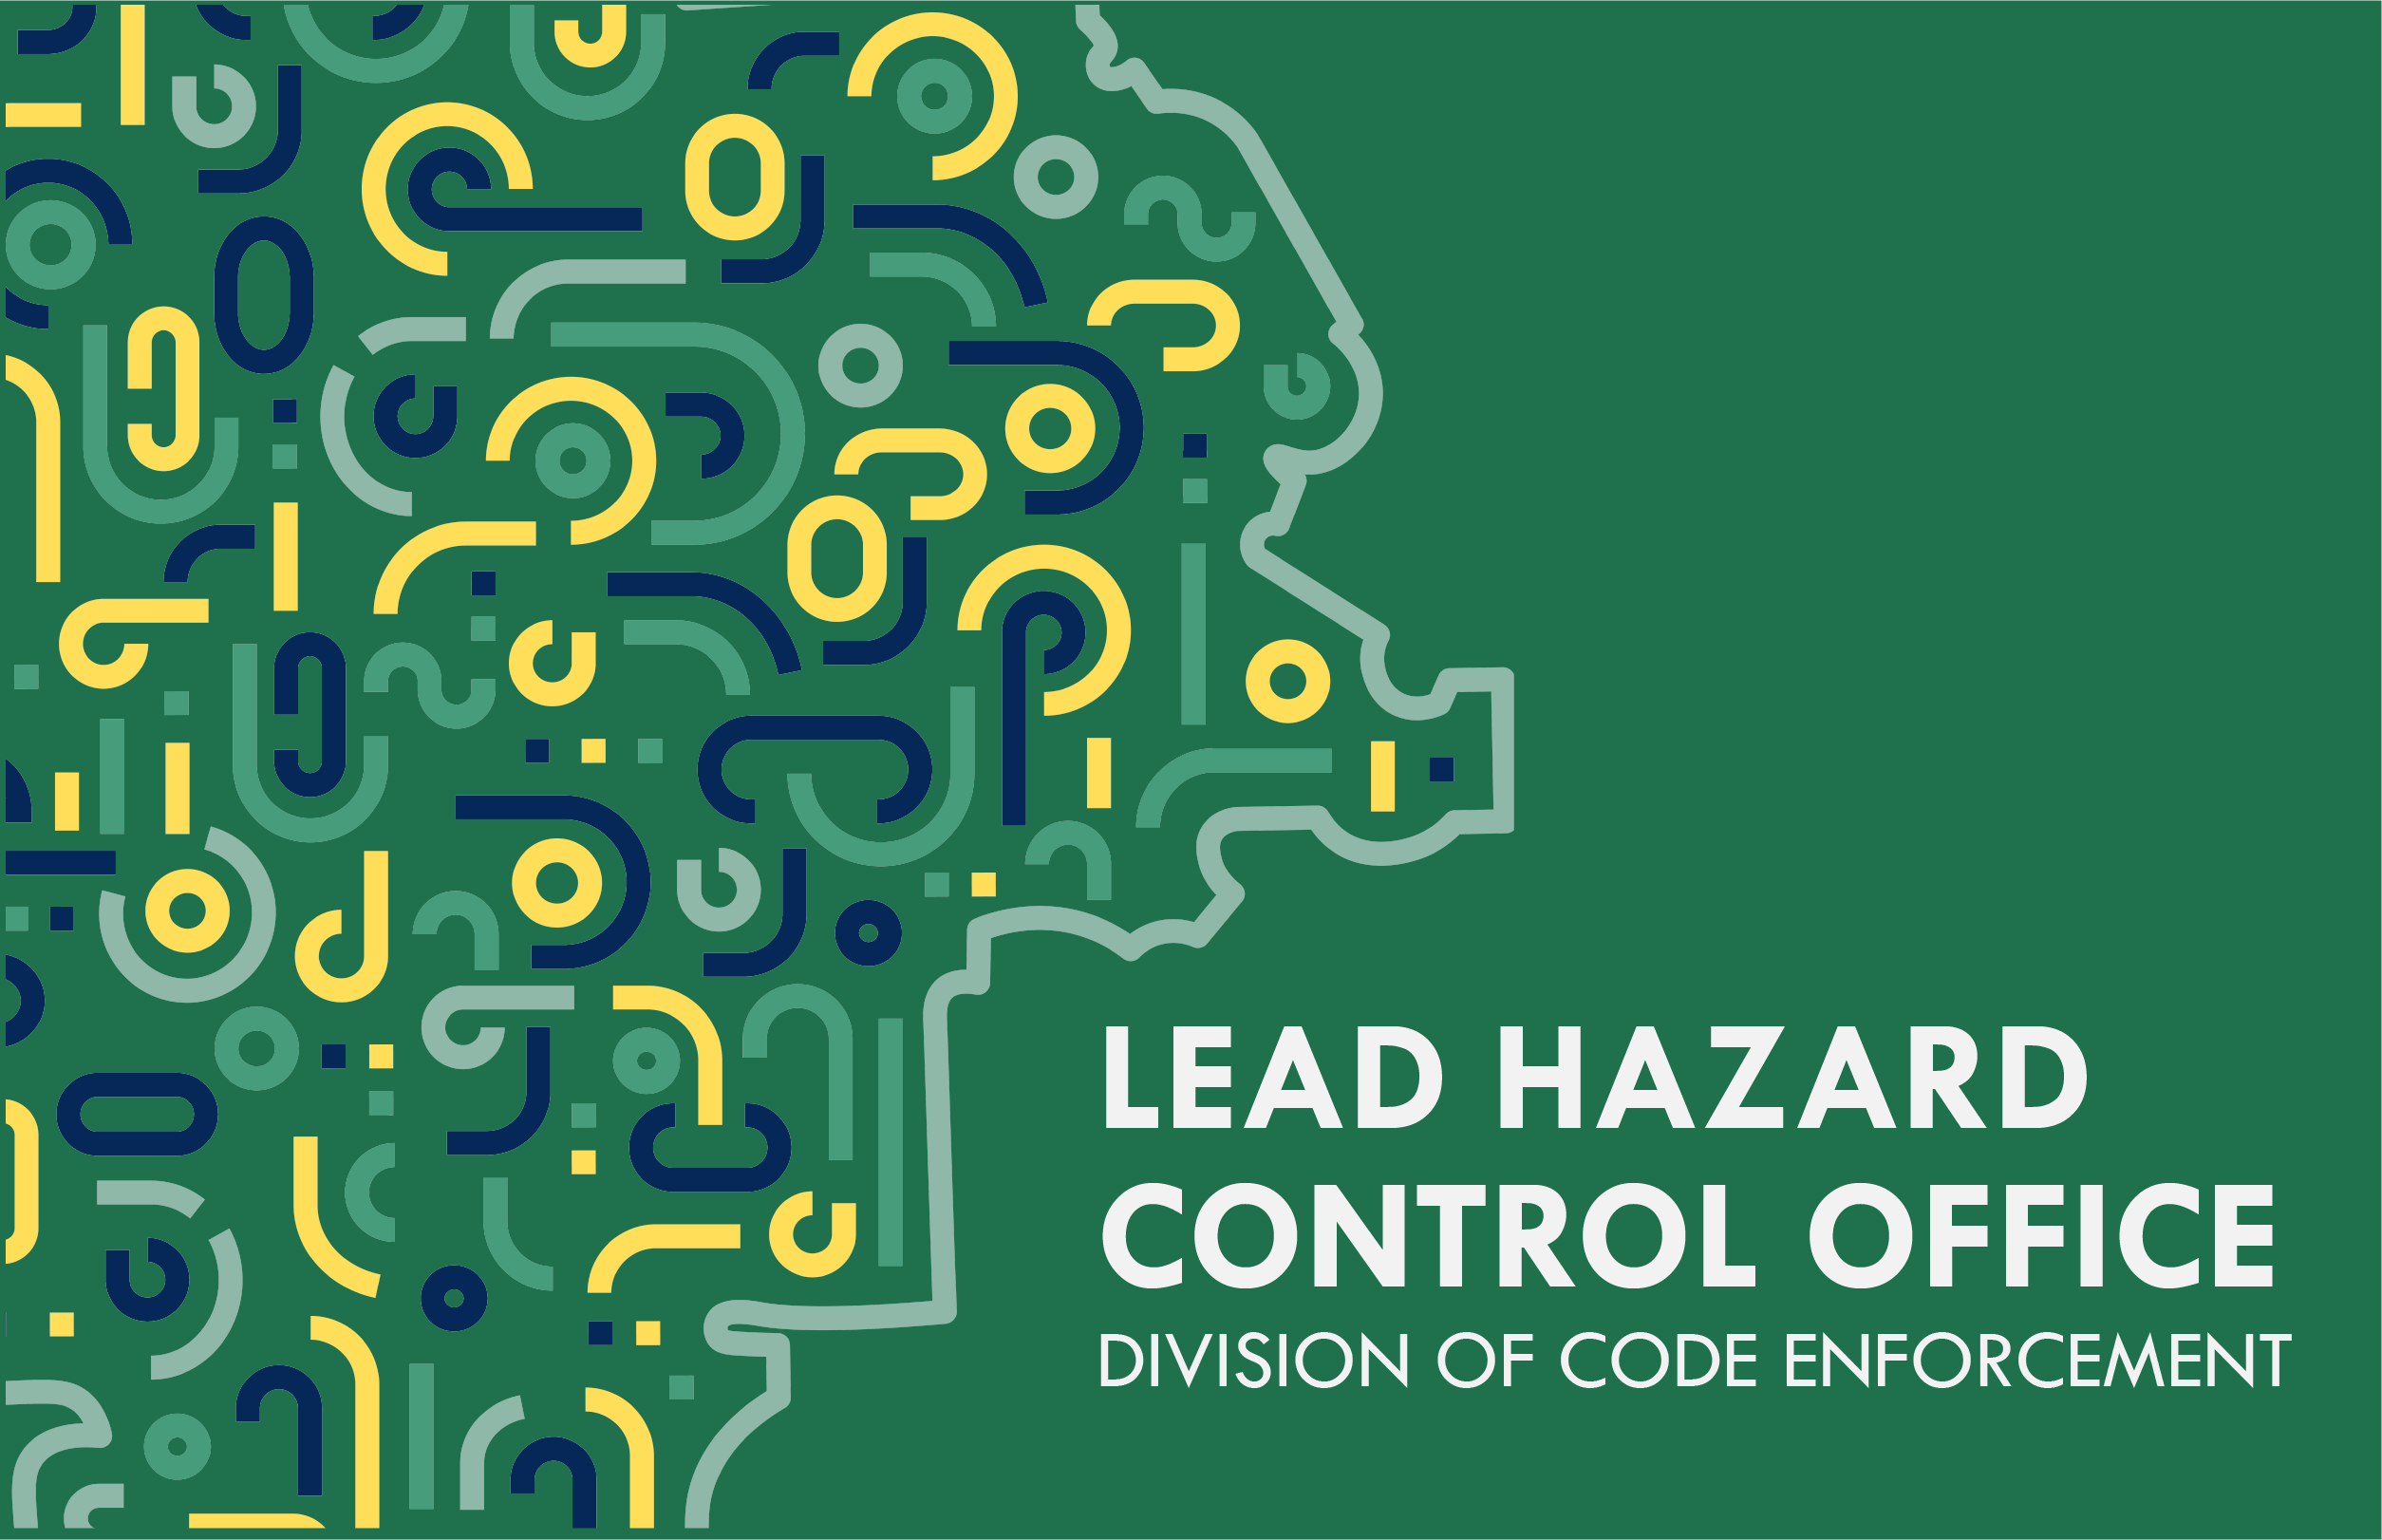 Lead Hazard Control Office_Division of Code Enforcement.png